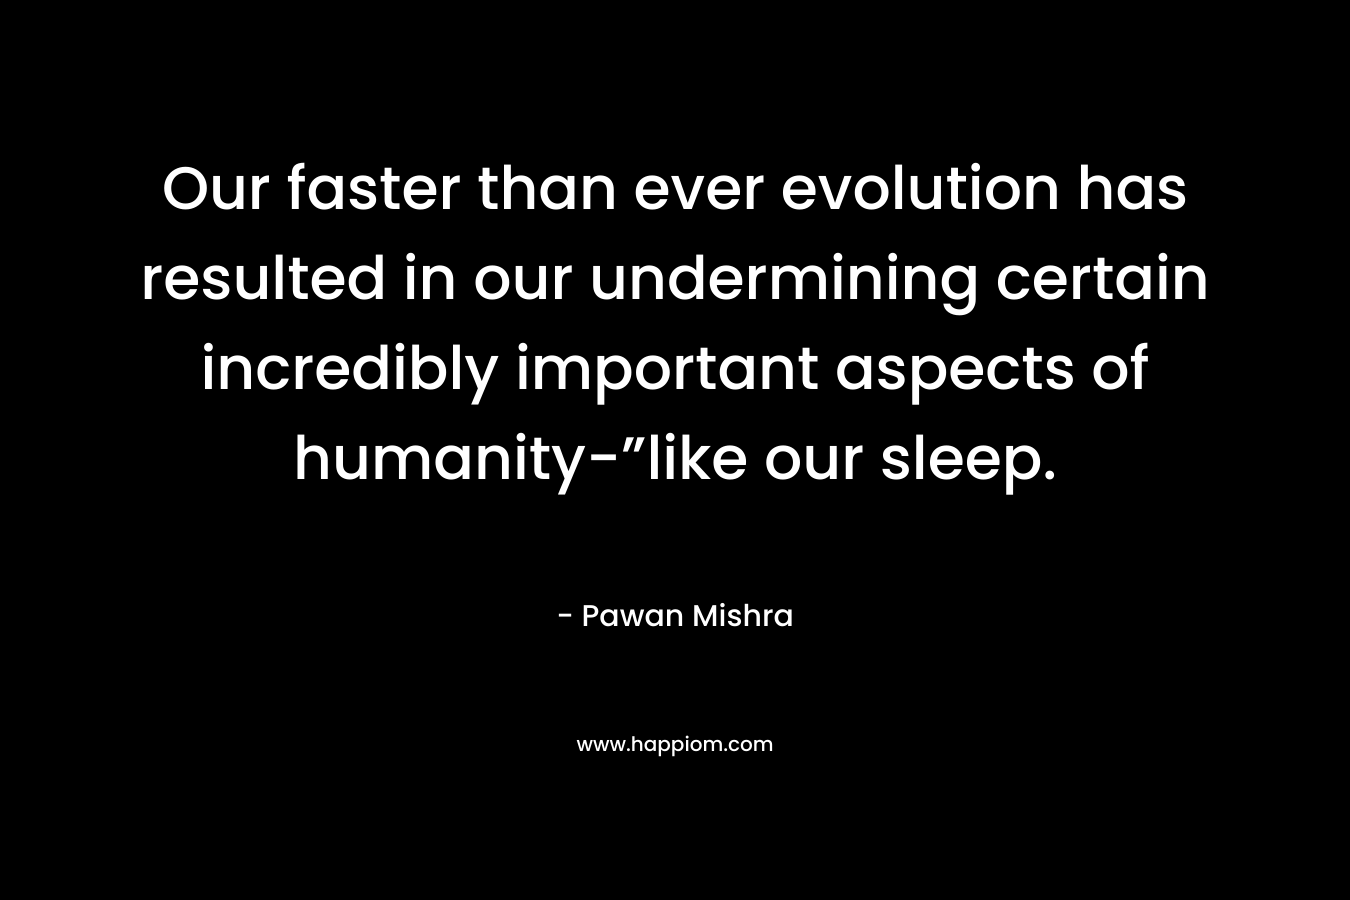 Our faster than ever evolution has resulted in our undermining certain incredibly important aspects of humanity-”like our sleep. – Pawan Mishra